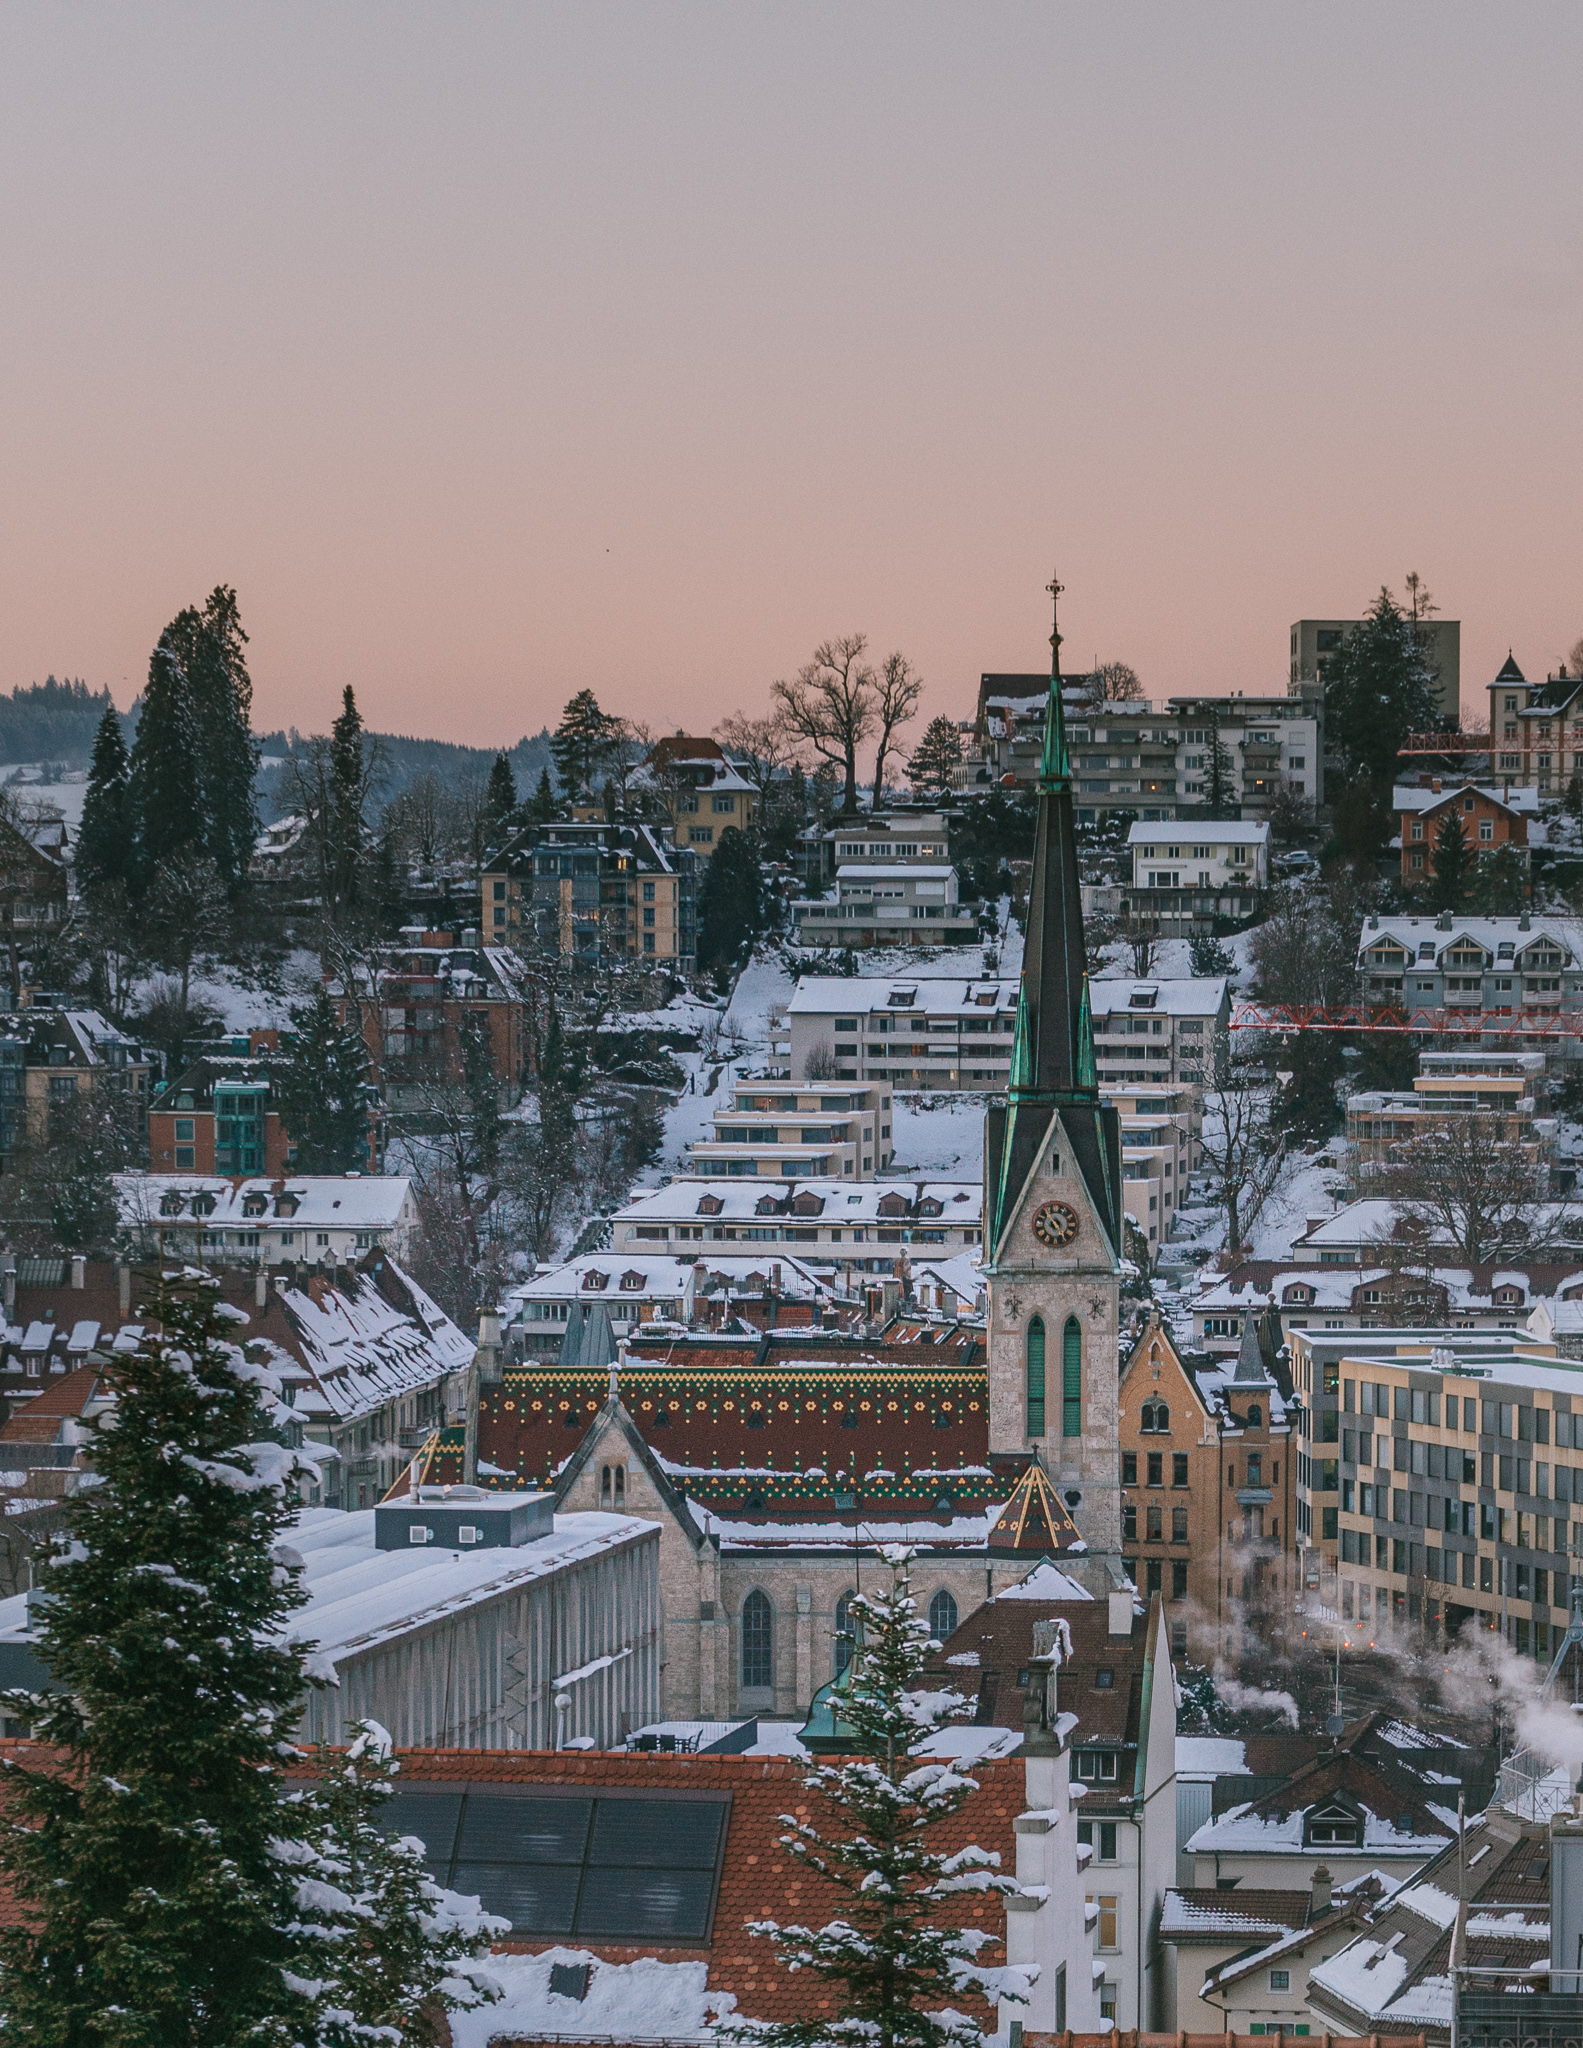 A pink sunset views of St. Gallen in winter, with the church in the center, and surrounding buildings and trees covere in snow.